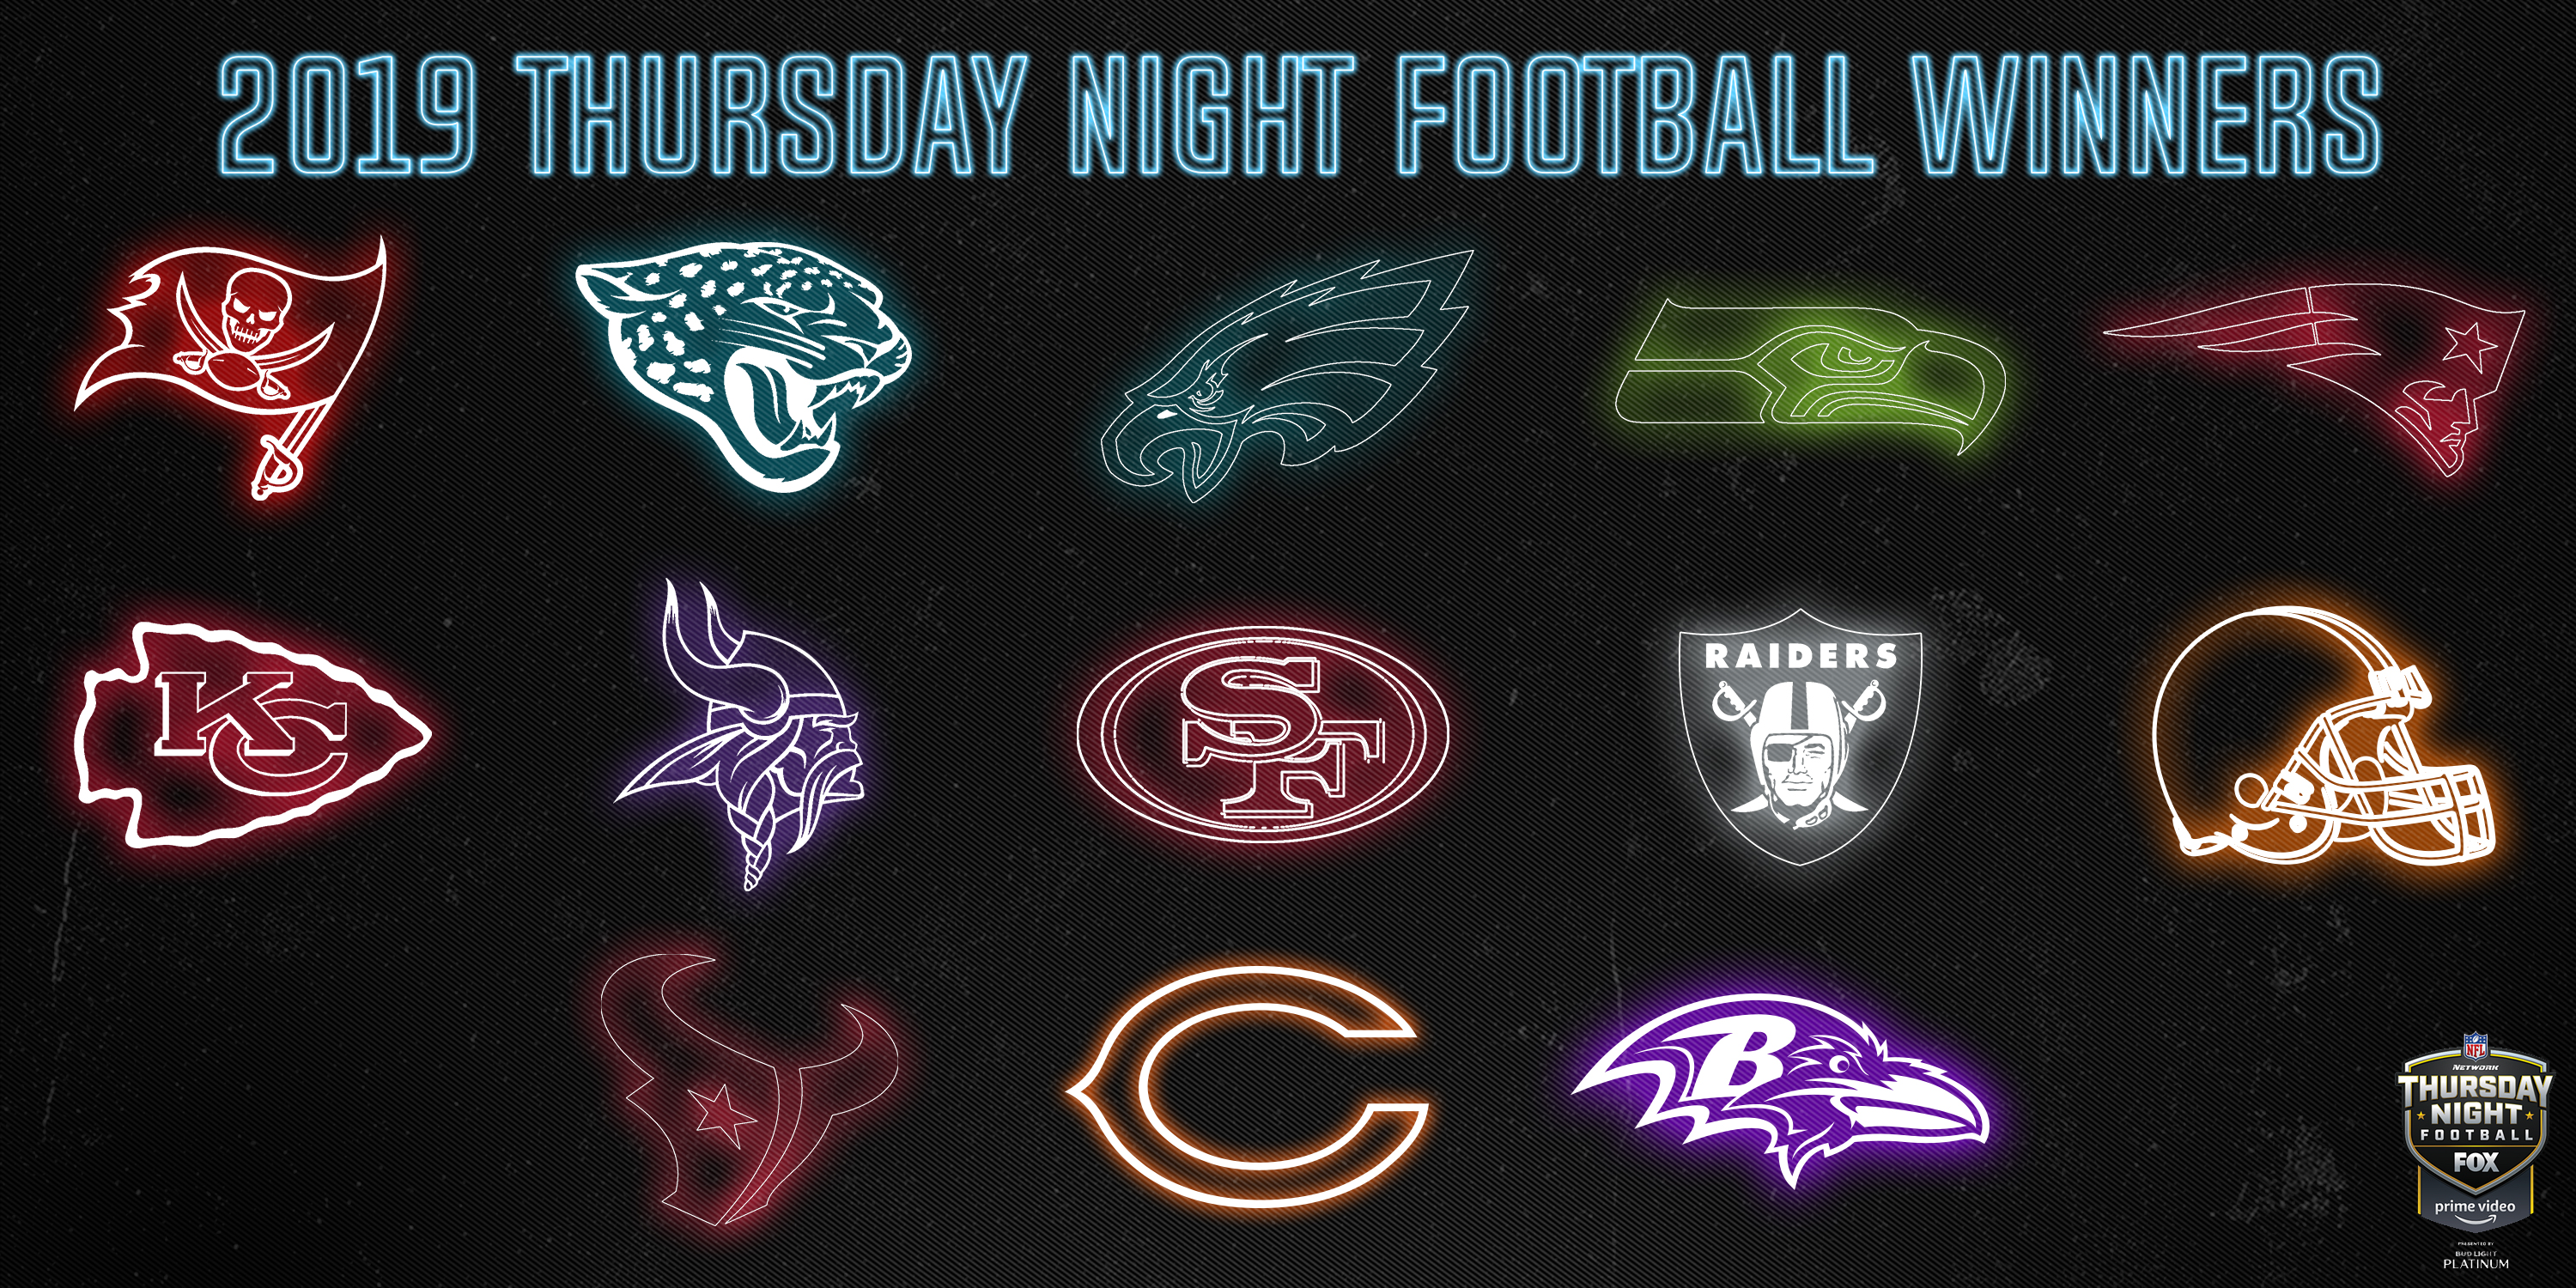 FOX Sports: NFL on X: 'That's a wrap on Thursday Night Football for 2019!  RT if your team got a W on TNF this year!  / X